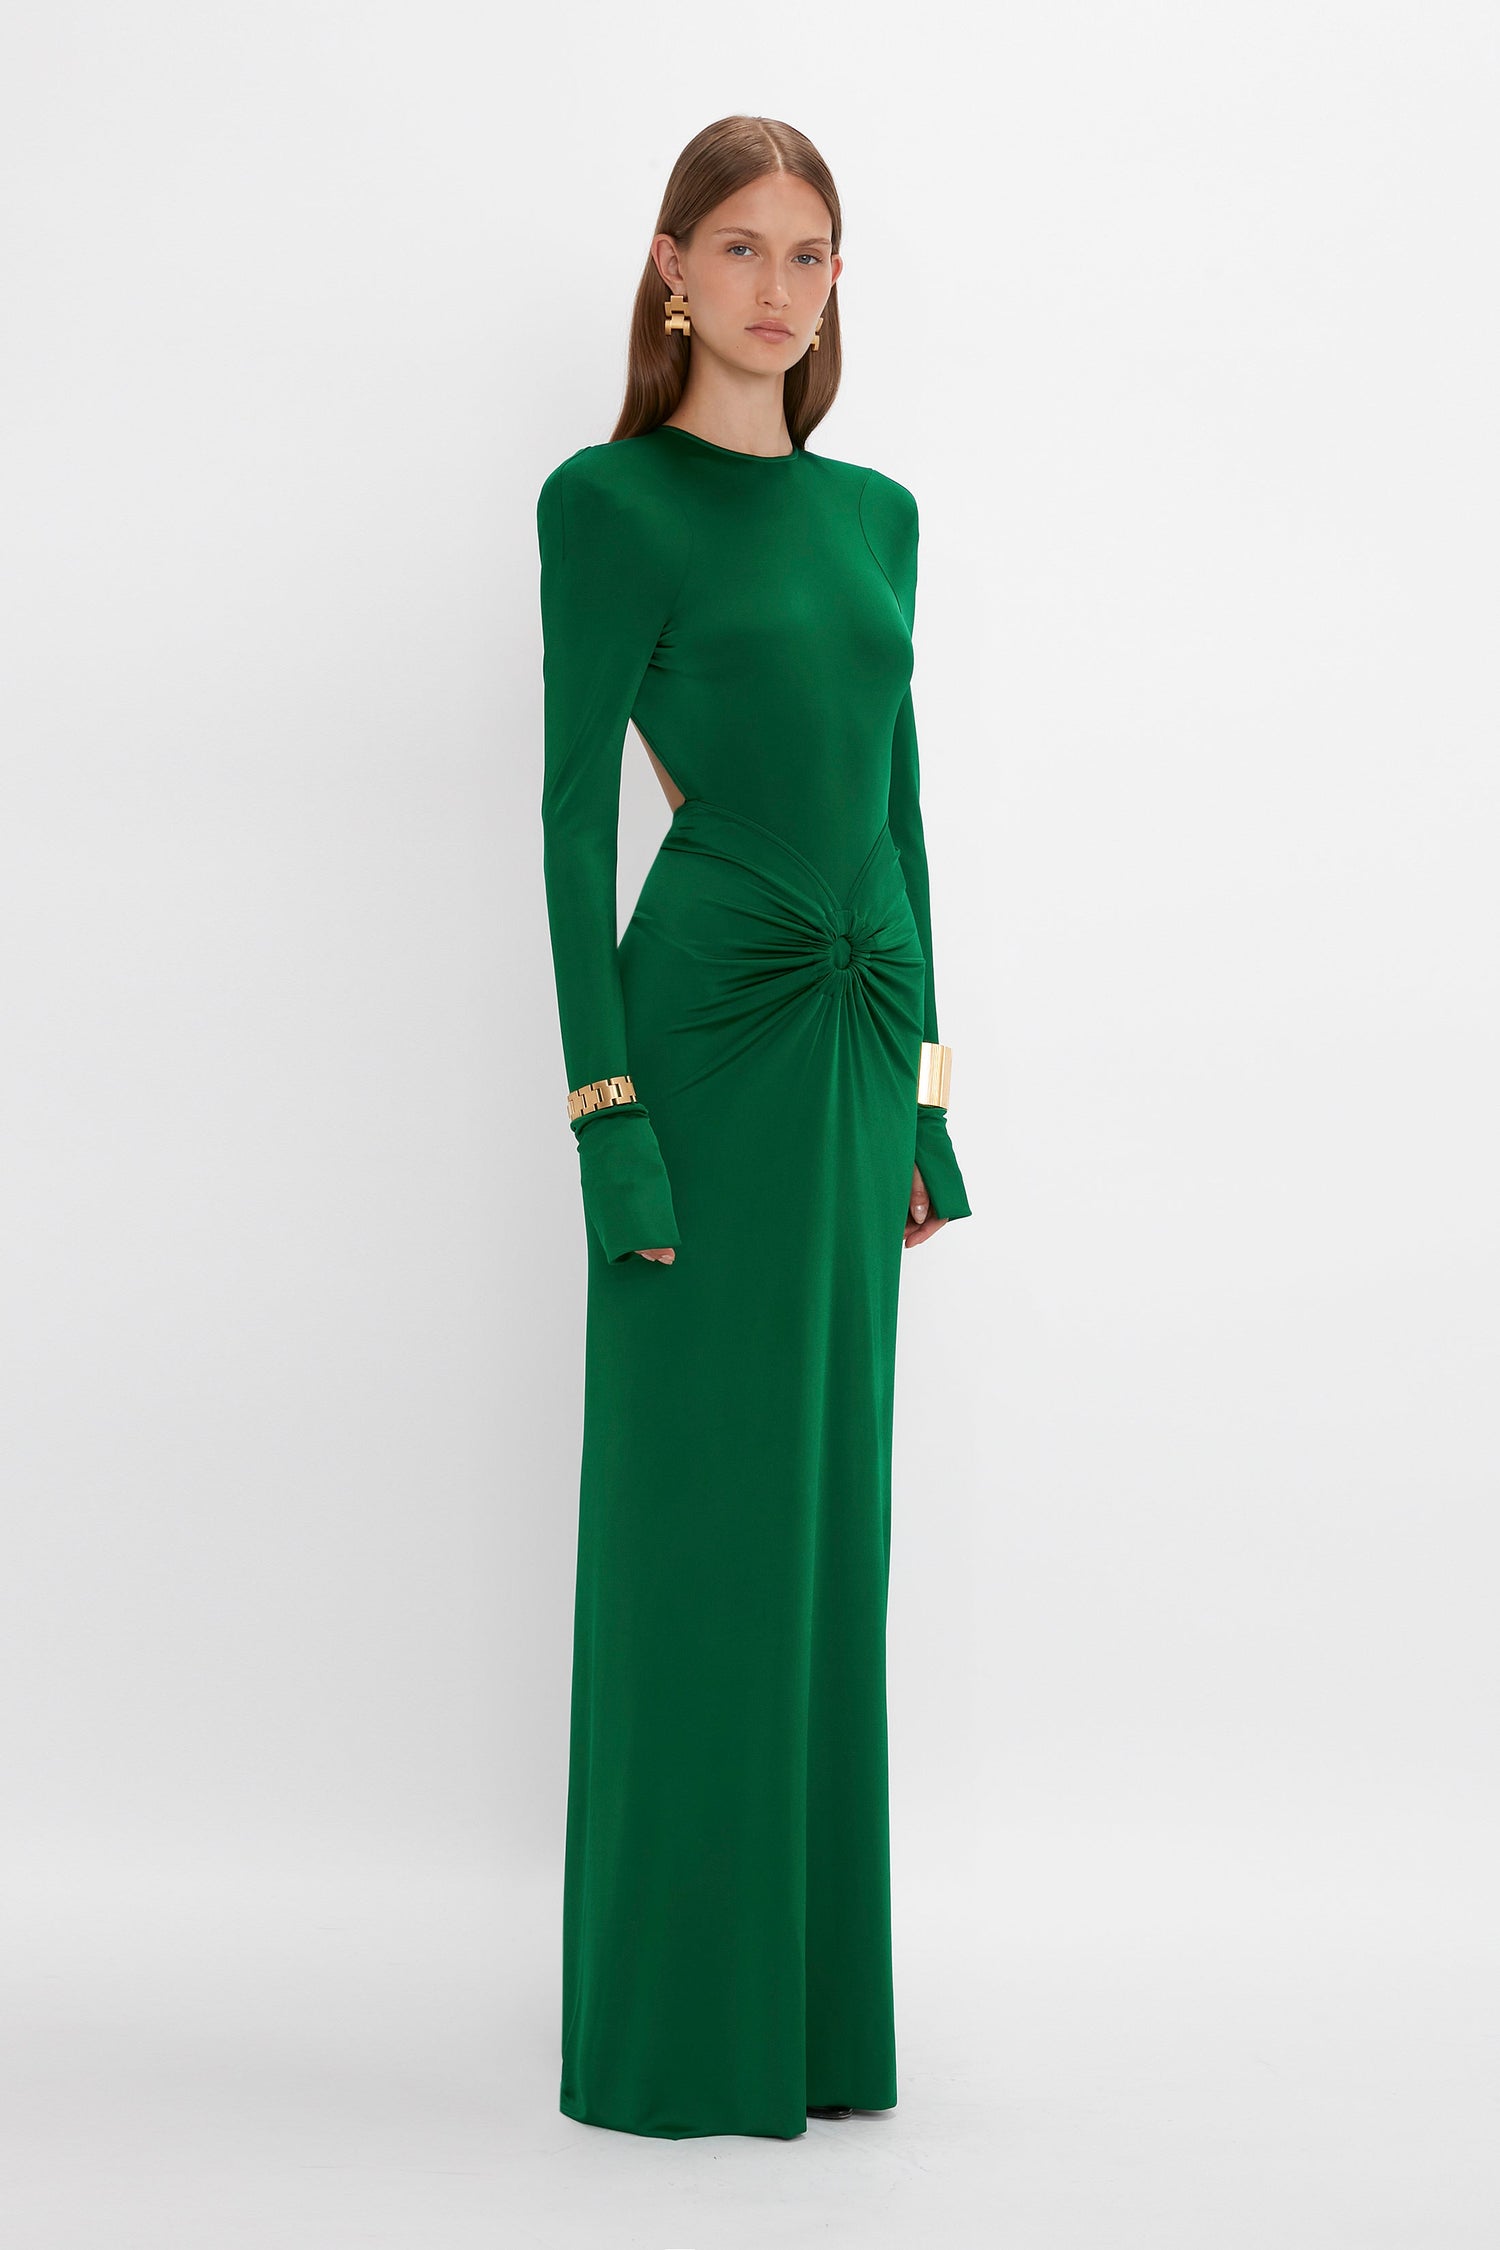 A woman stands in a Victoria Beckham Circle Detail Open Back Gown In Emerald. The floor-length dress with side cutouts and gathered detailing at the waist is made from body-sculpting jersey fabric that accentuates her figure. She wears gold bracelets and long earrings. She has straight, long hair and a neutral expression.